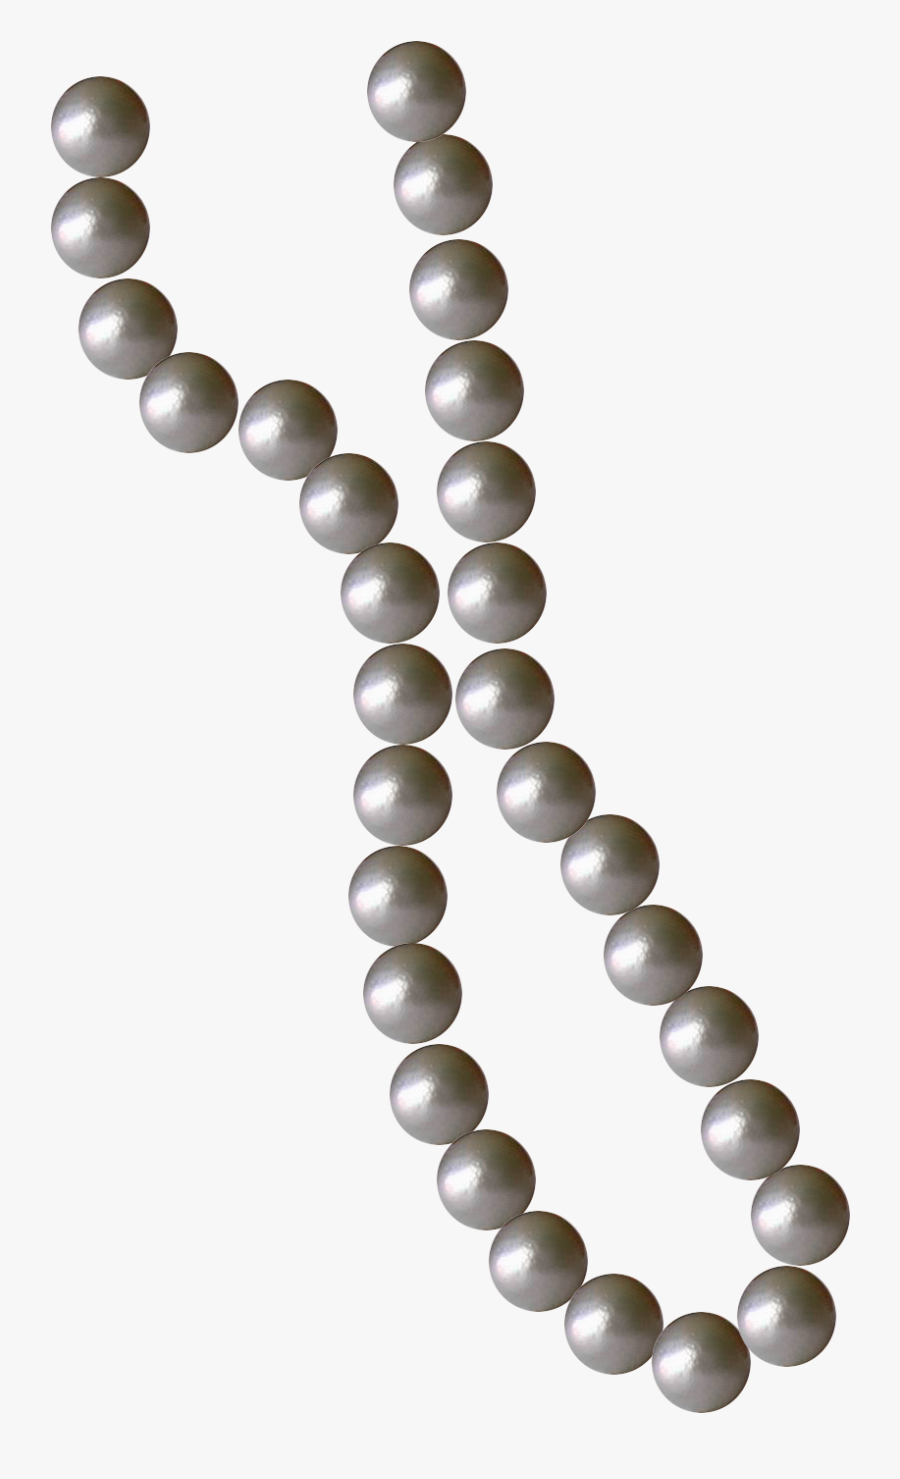 String Of Pearls Clipart, Transparent Clipart